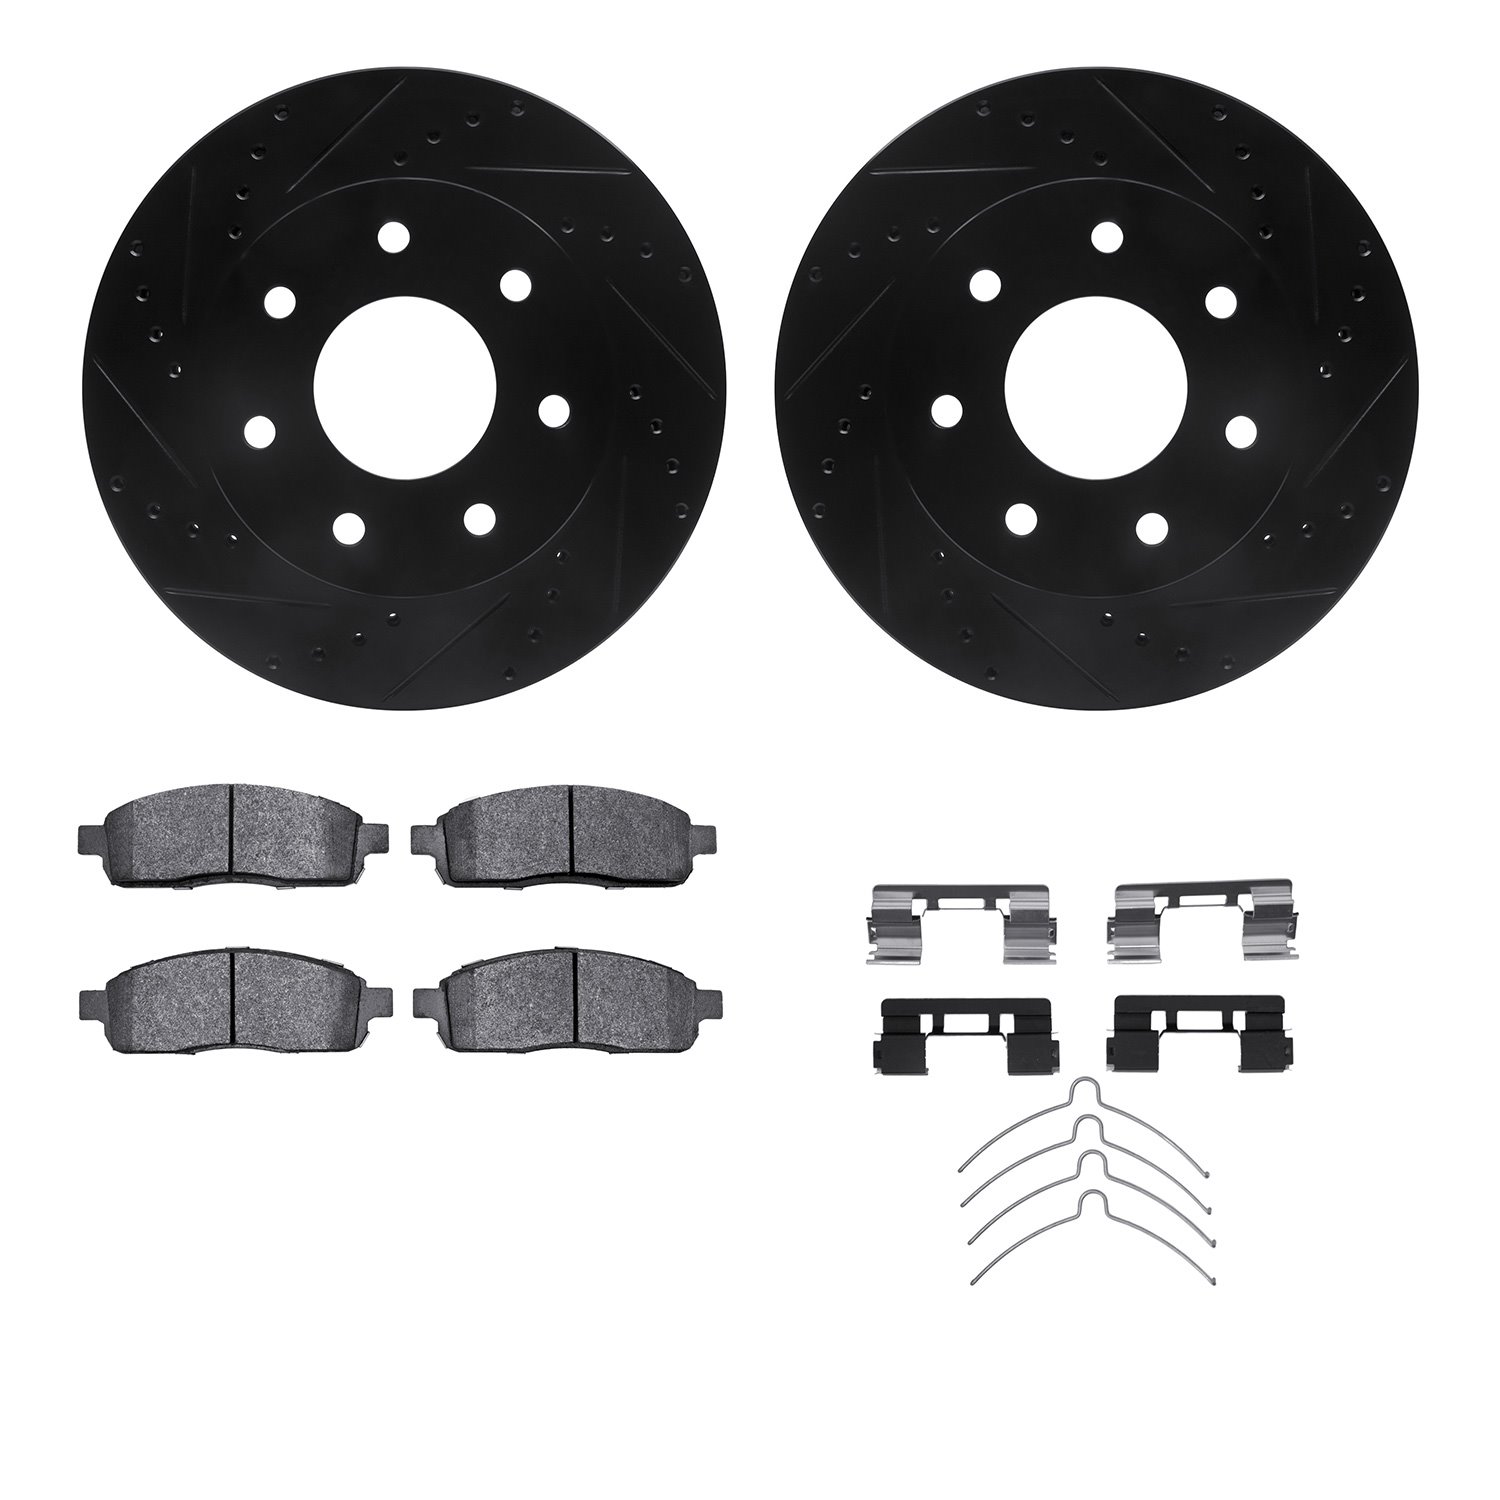 8412-54074 Drilled/Slotted Brake Rotors with Ultimate-Duty Brake Pads Kit & Hardware [Black], 2004-2008 Ford/Lincoln/Mercury/Maz